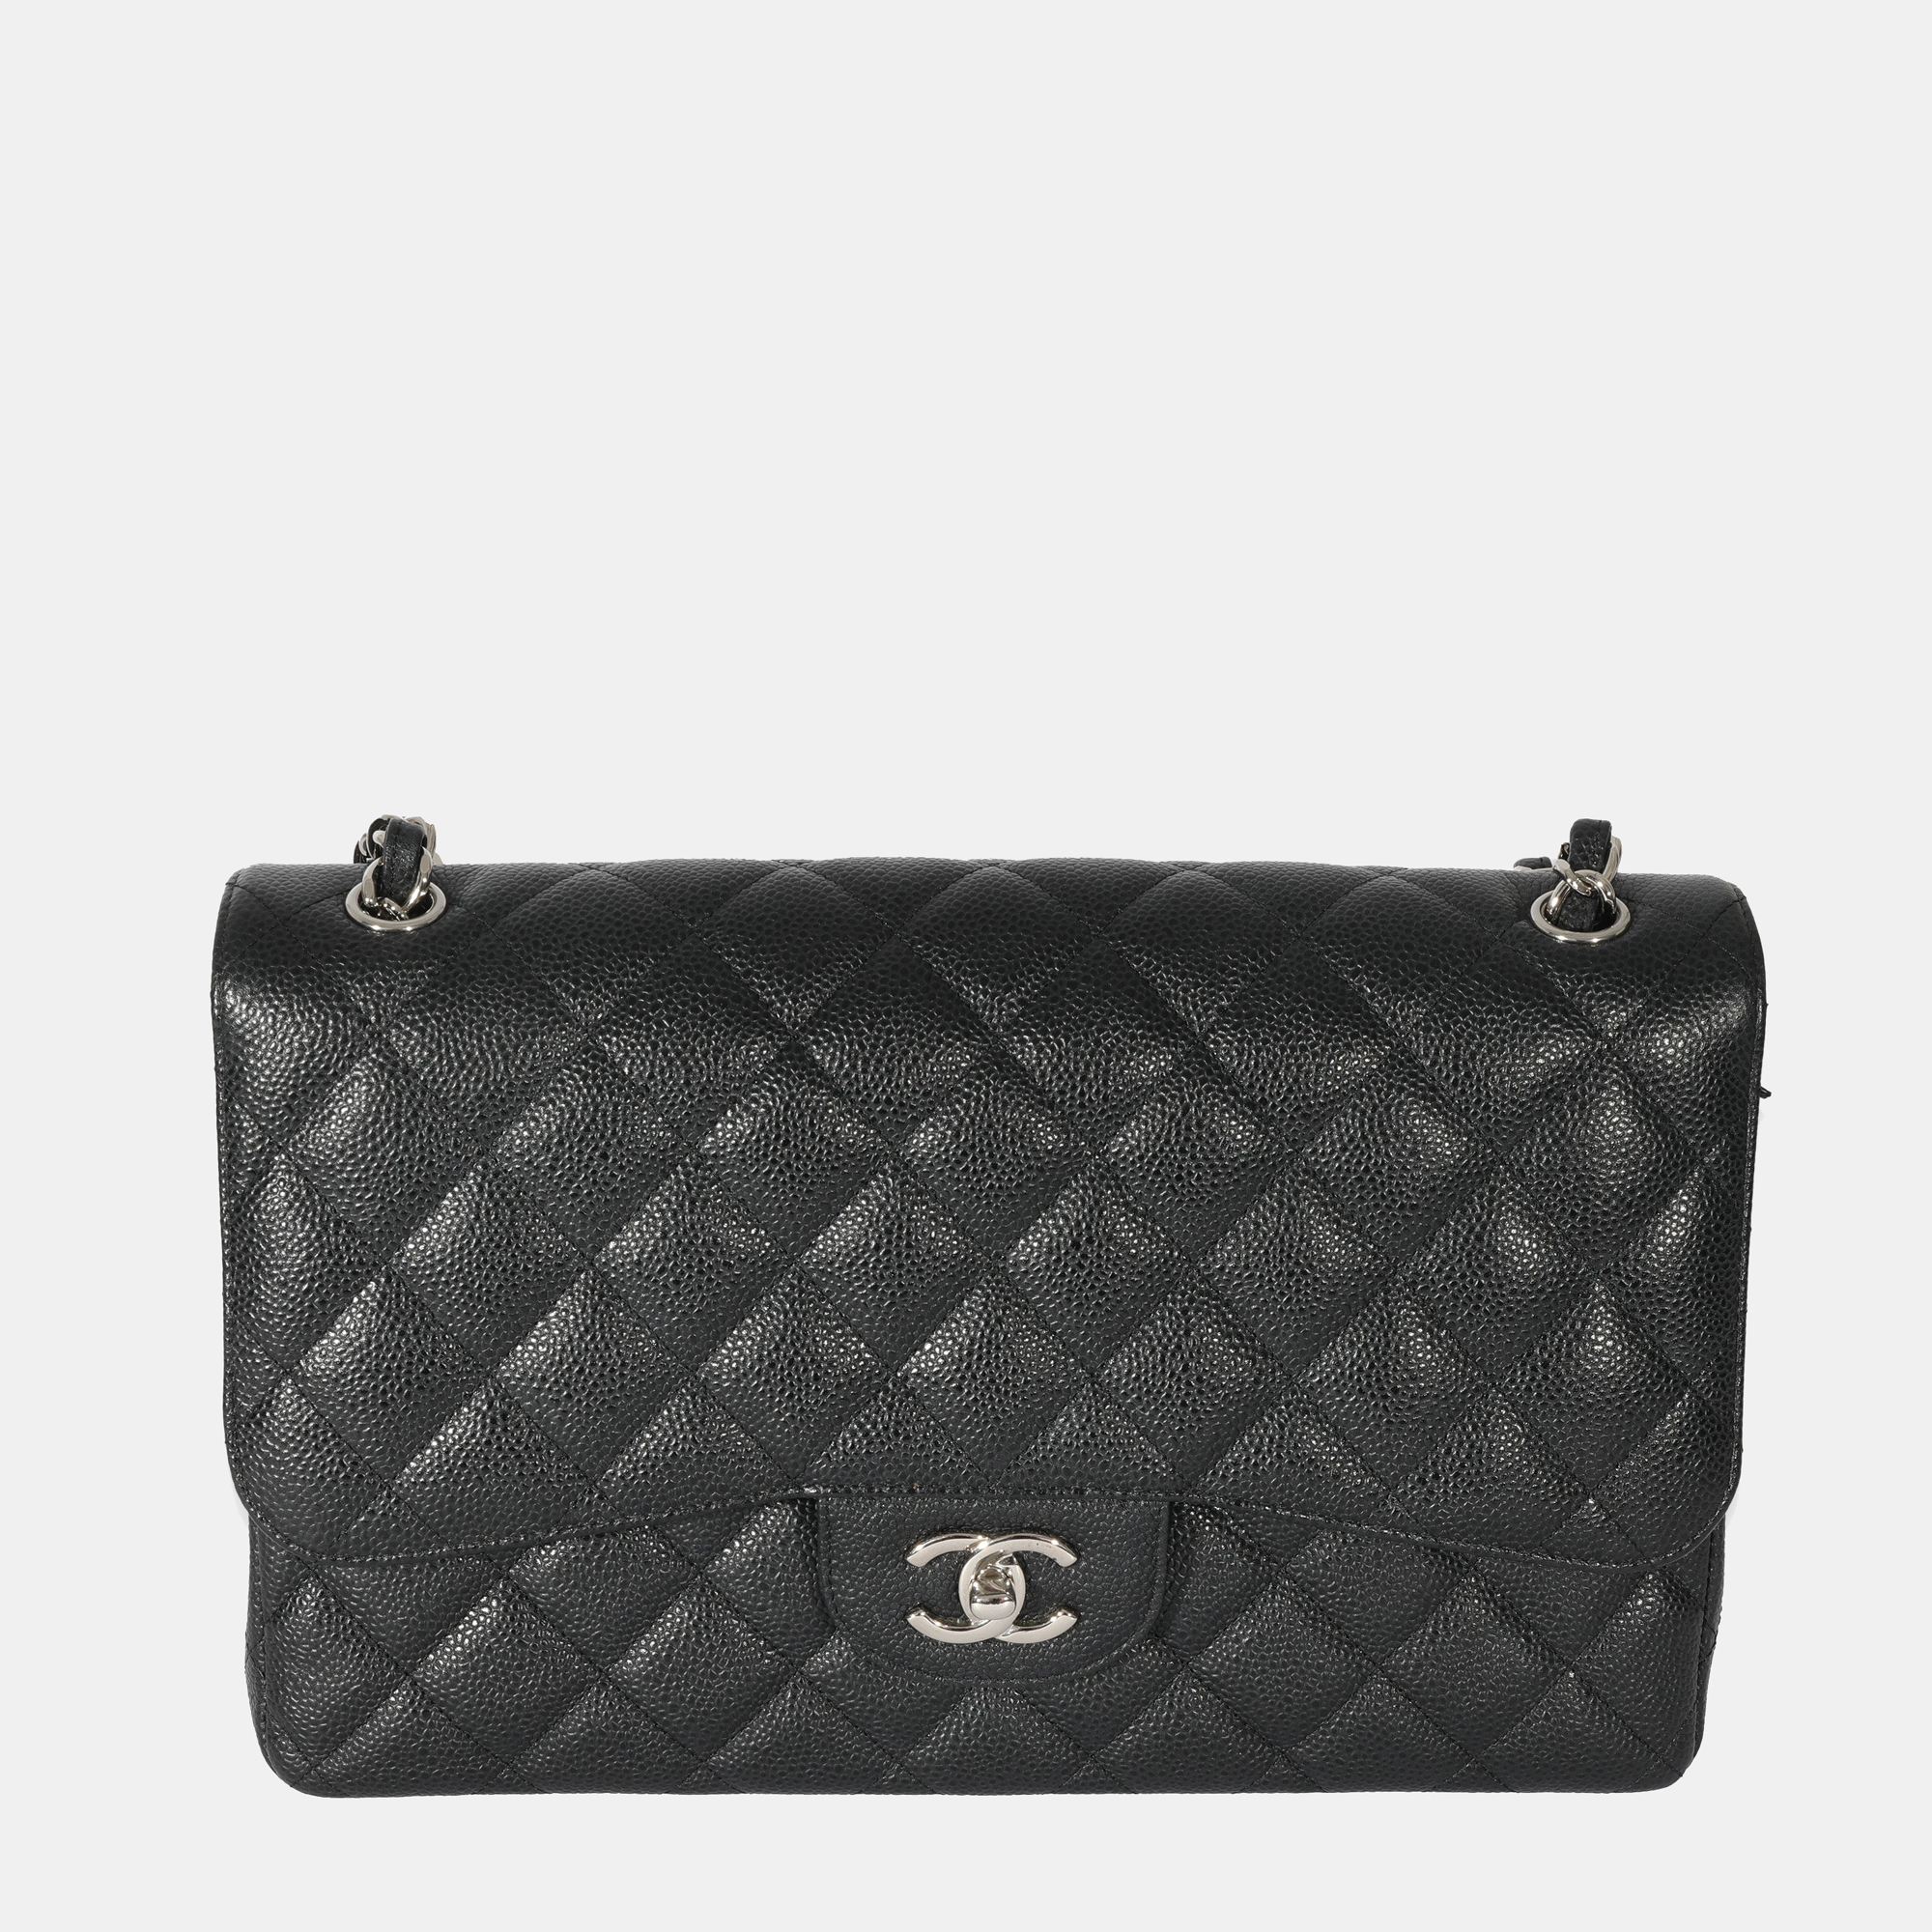 Pre-owned Chanel Black Caviar Leather Classic Jumbo Double Flap